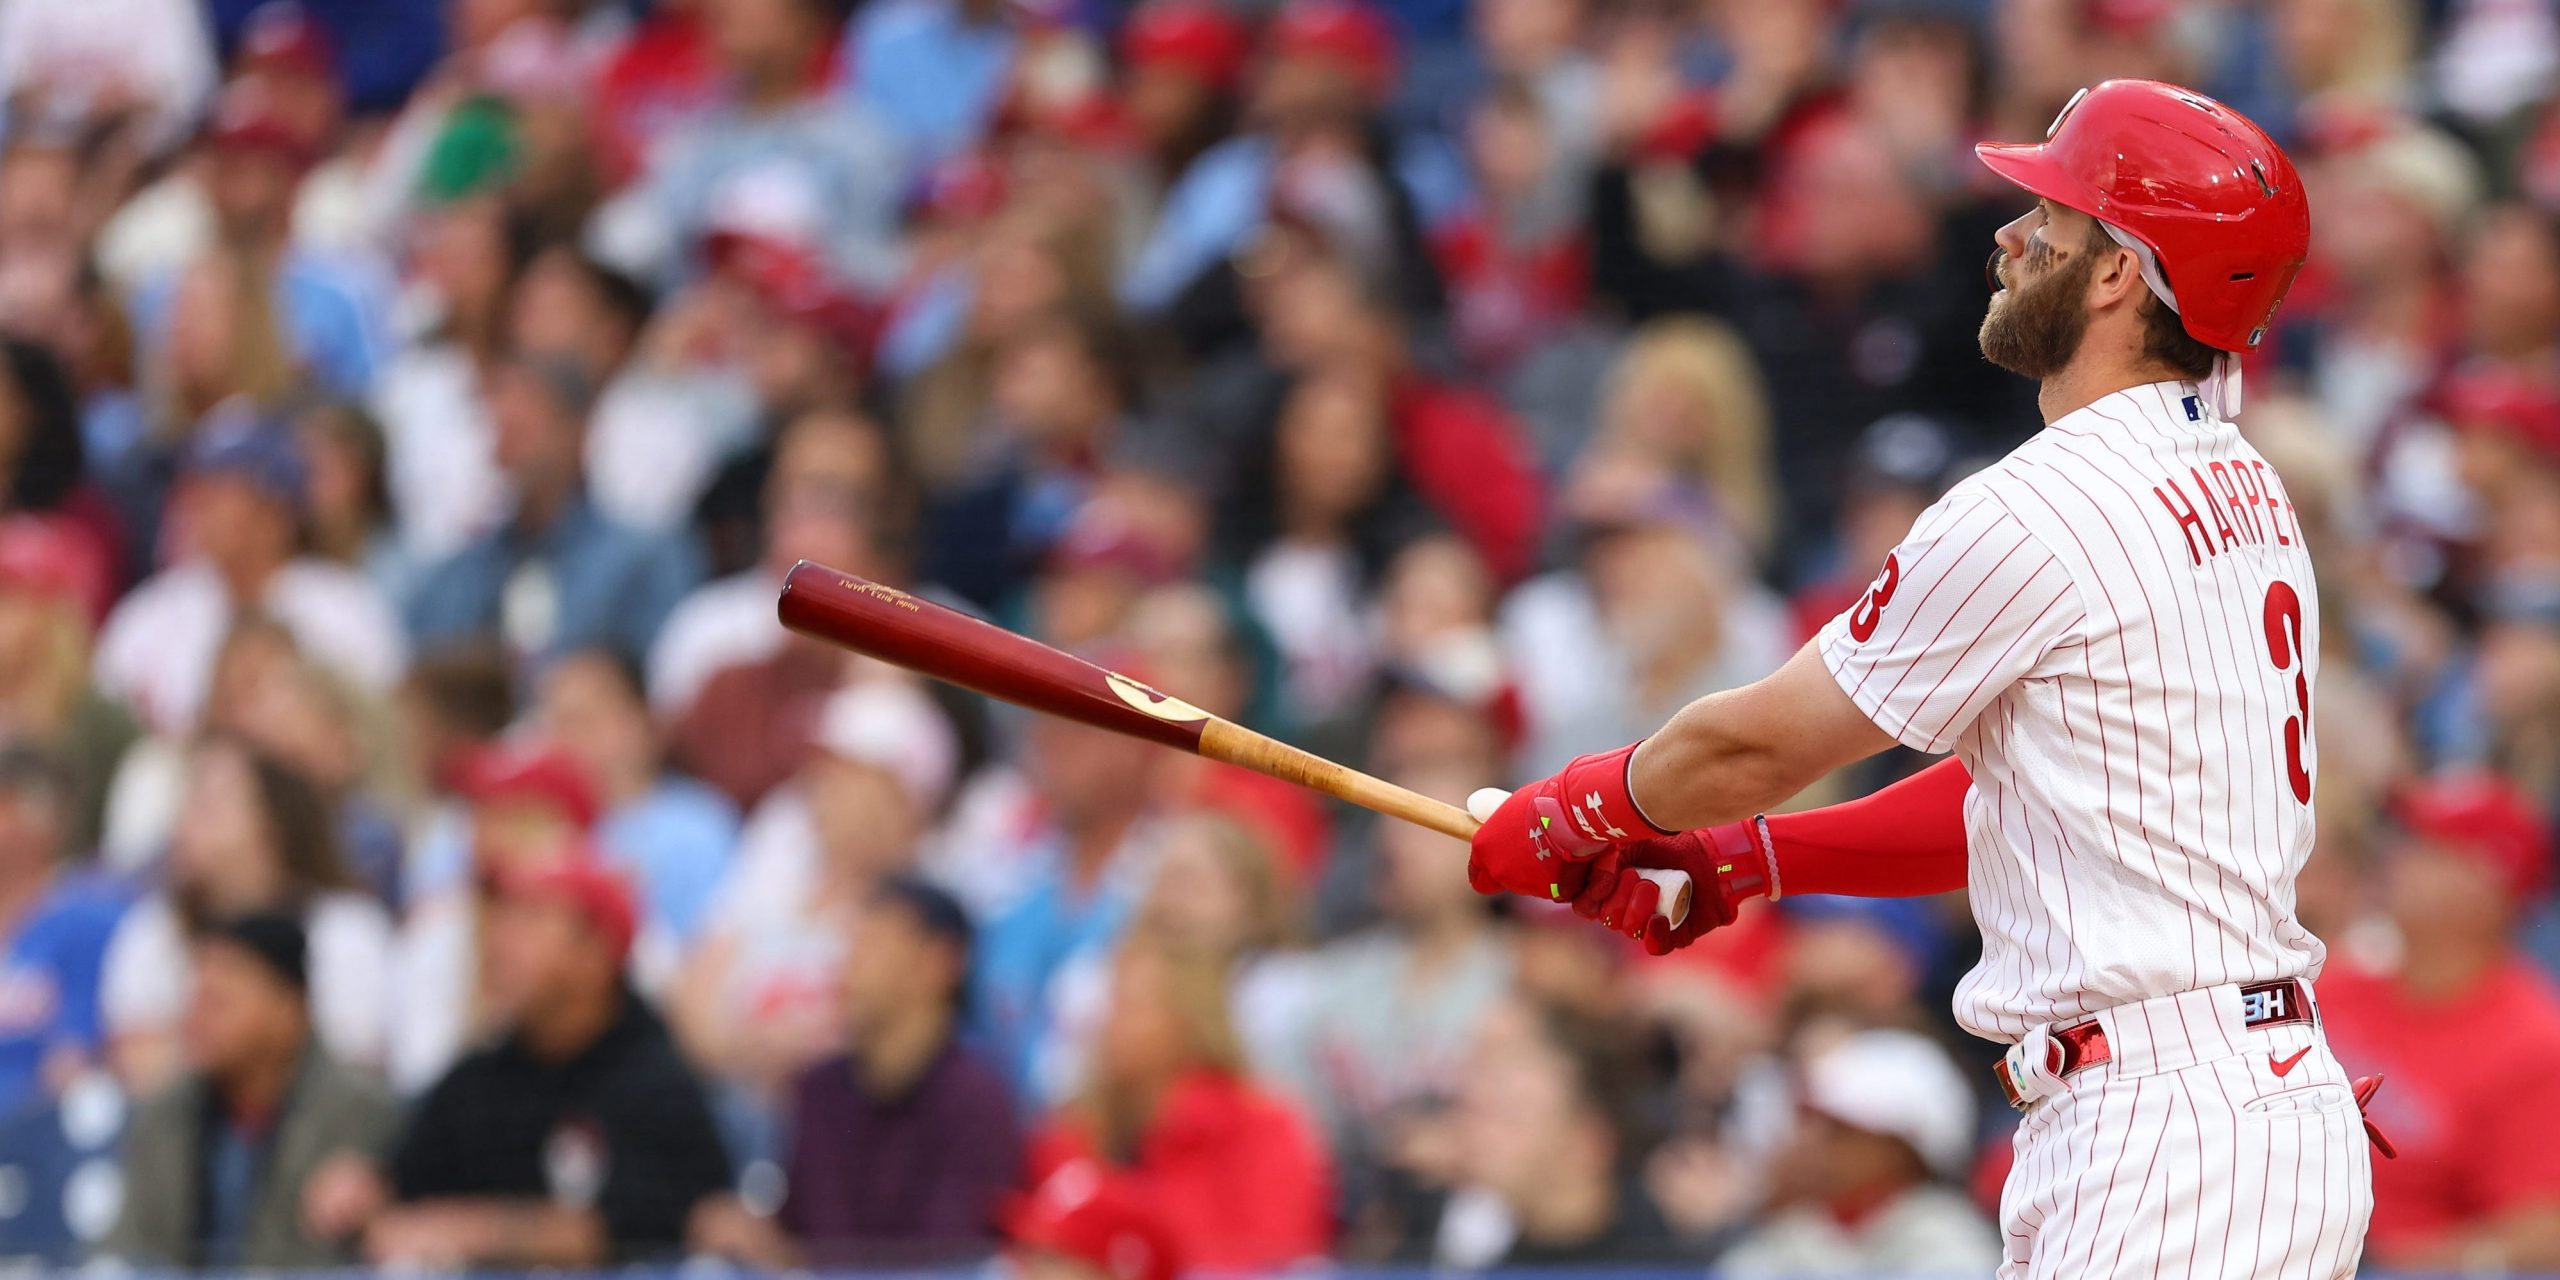 : Bryce Harper #3 of the Philadelphia Phillies watches as he hits a home run against the Washington Nationals during the second inning of a game at Citizens Bank Park on June 22, 2021 in Philadelphia, Pennsylvania.